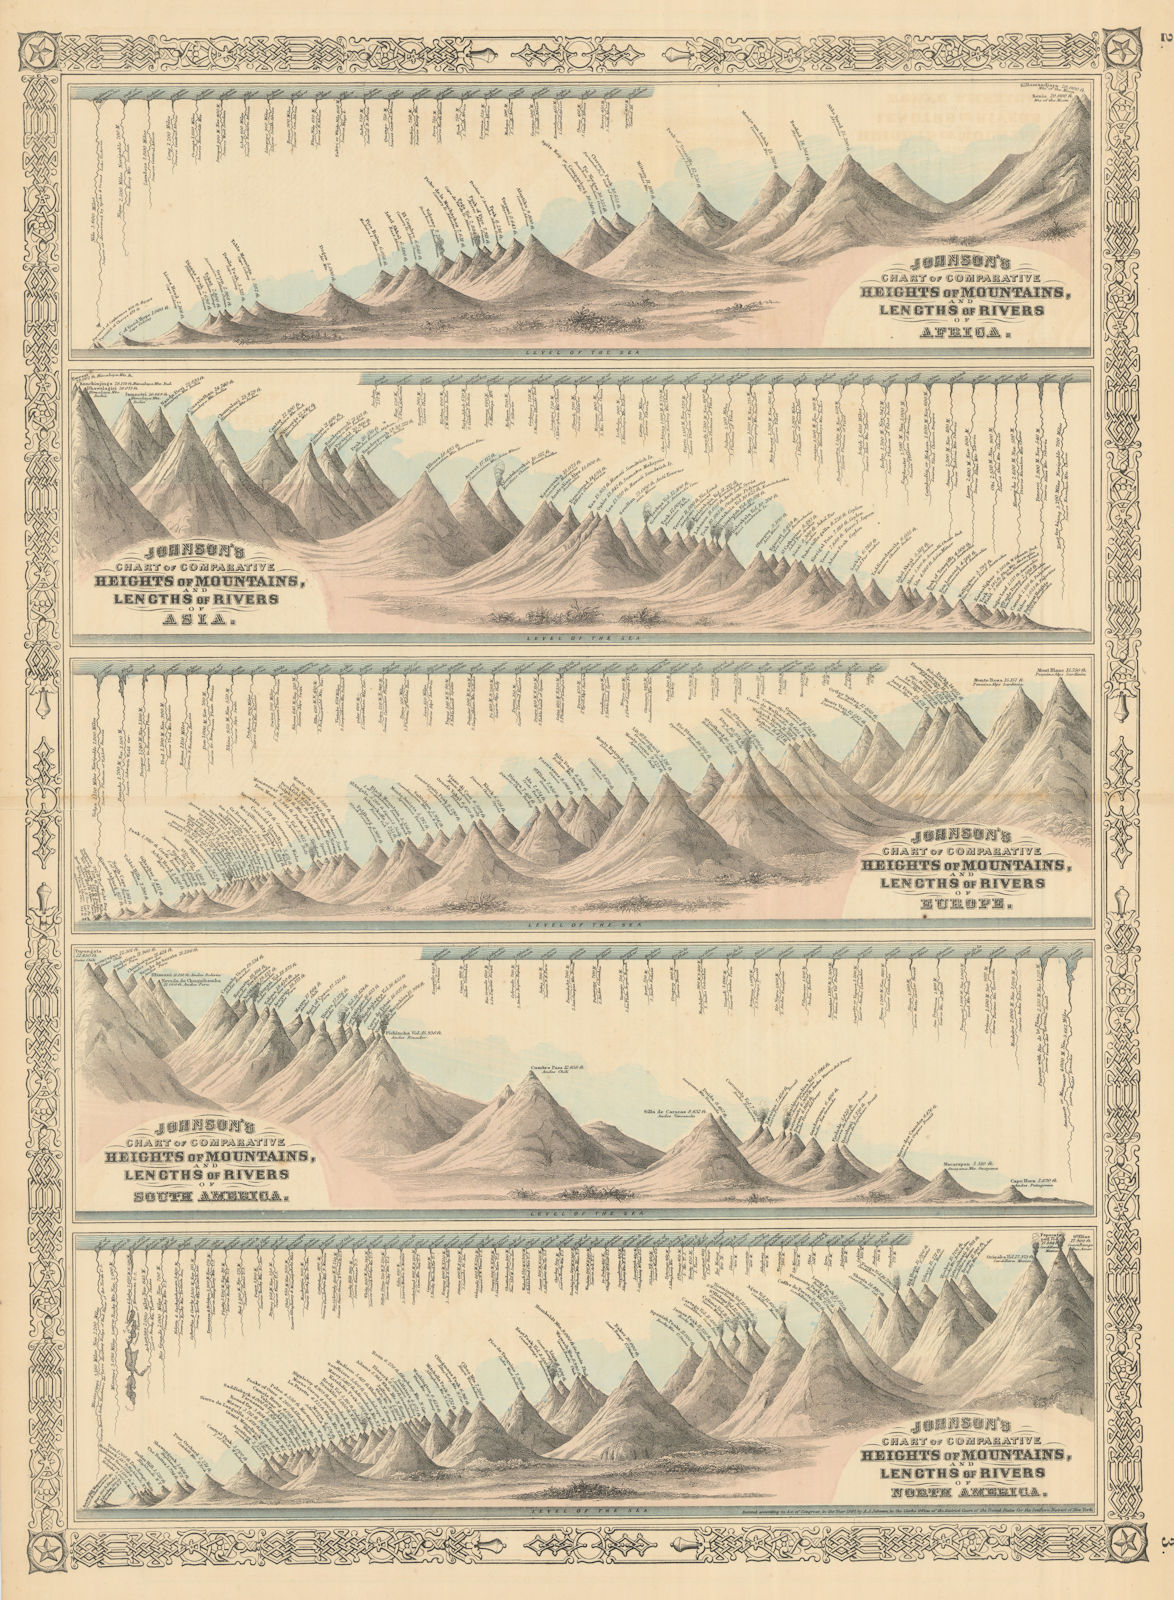 Johnson's Mountains Rivers. Africa, Asia, Europe, South & North America 1866 map